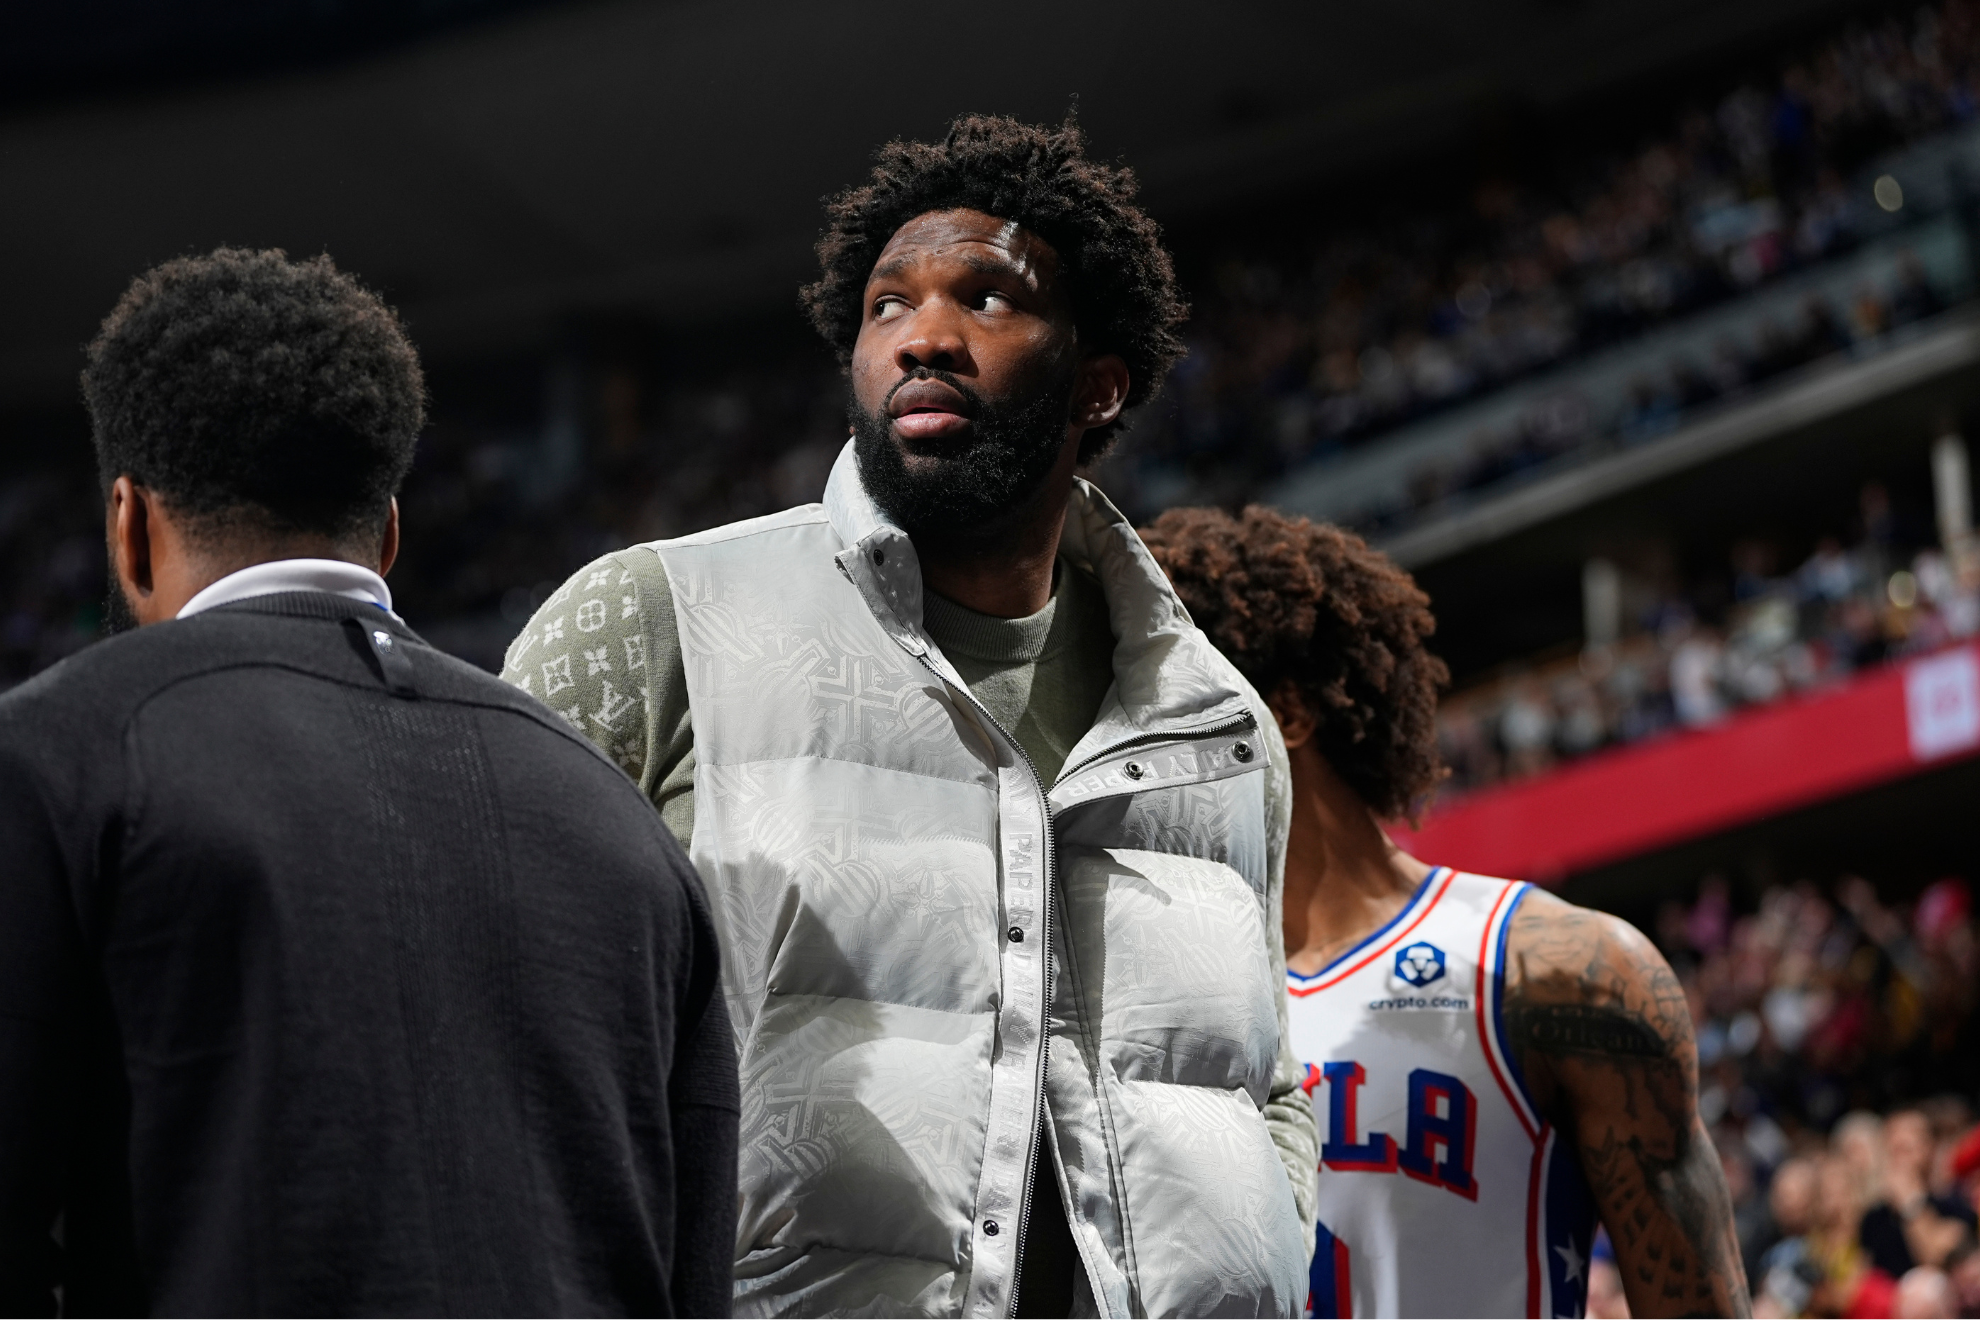 Joel Embiid on the sidelines during a Sixers game.